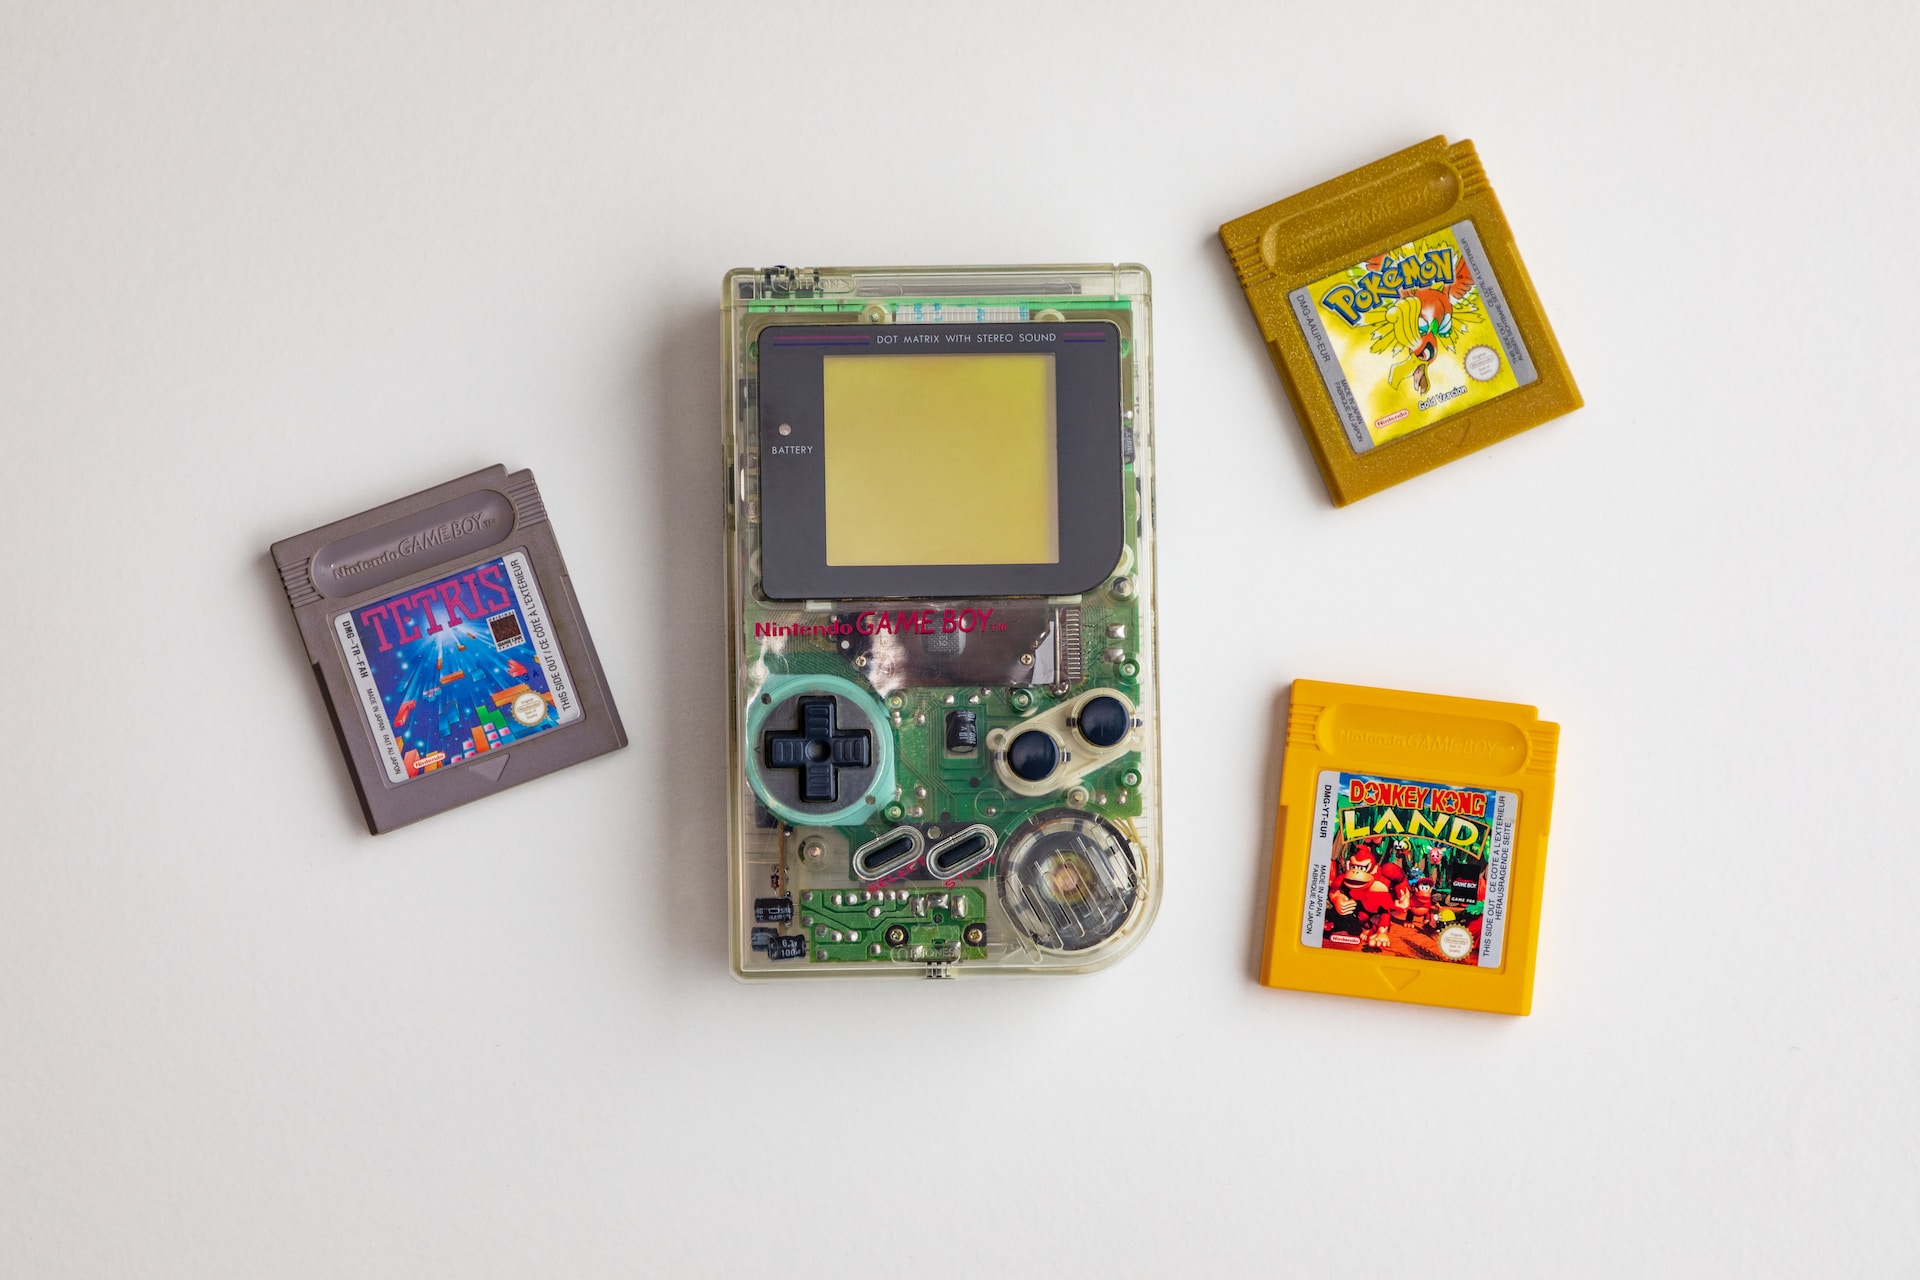 Yellow Play It Out Loud! Game Boy with 3 games next to it